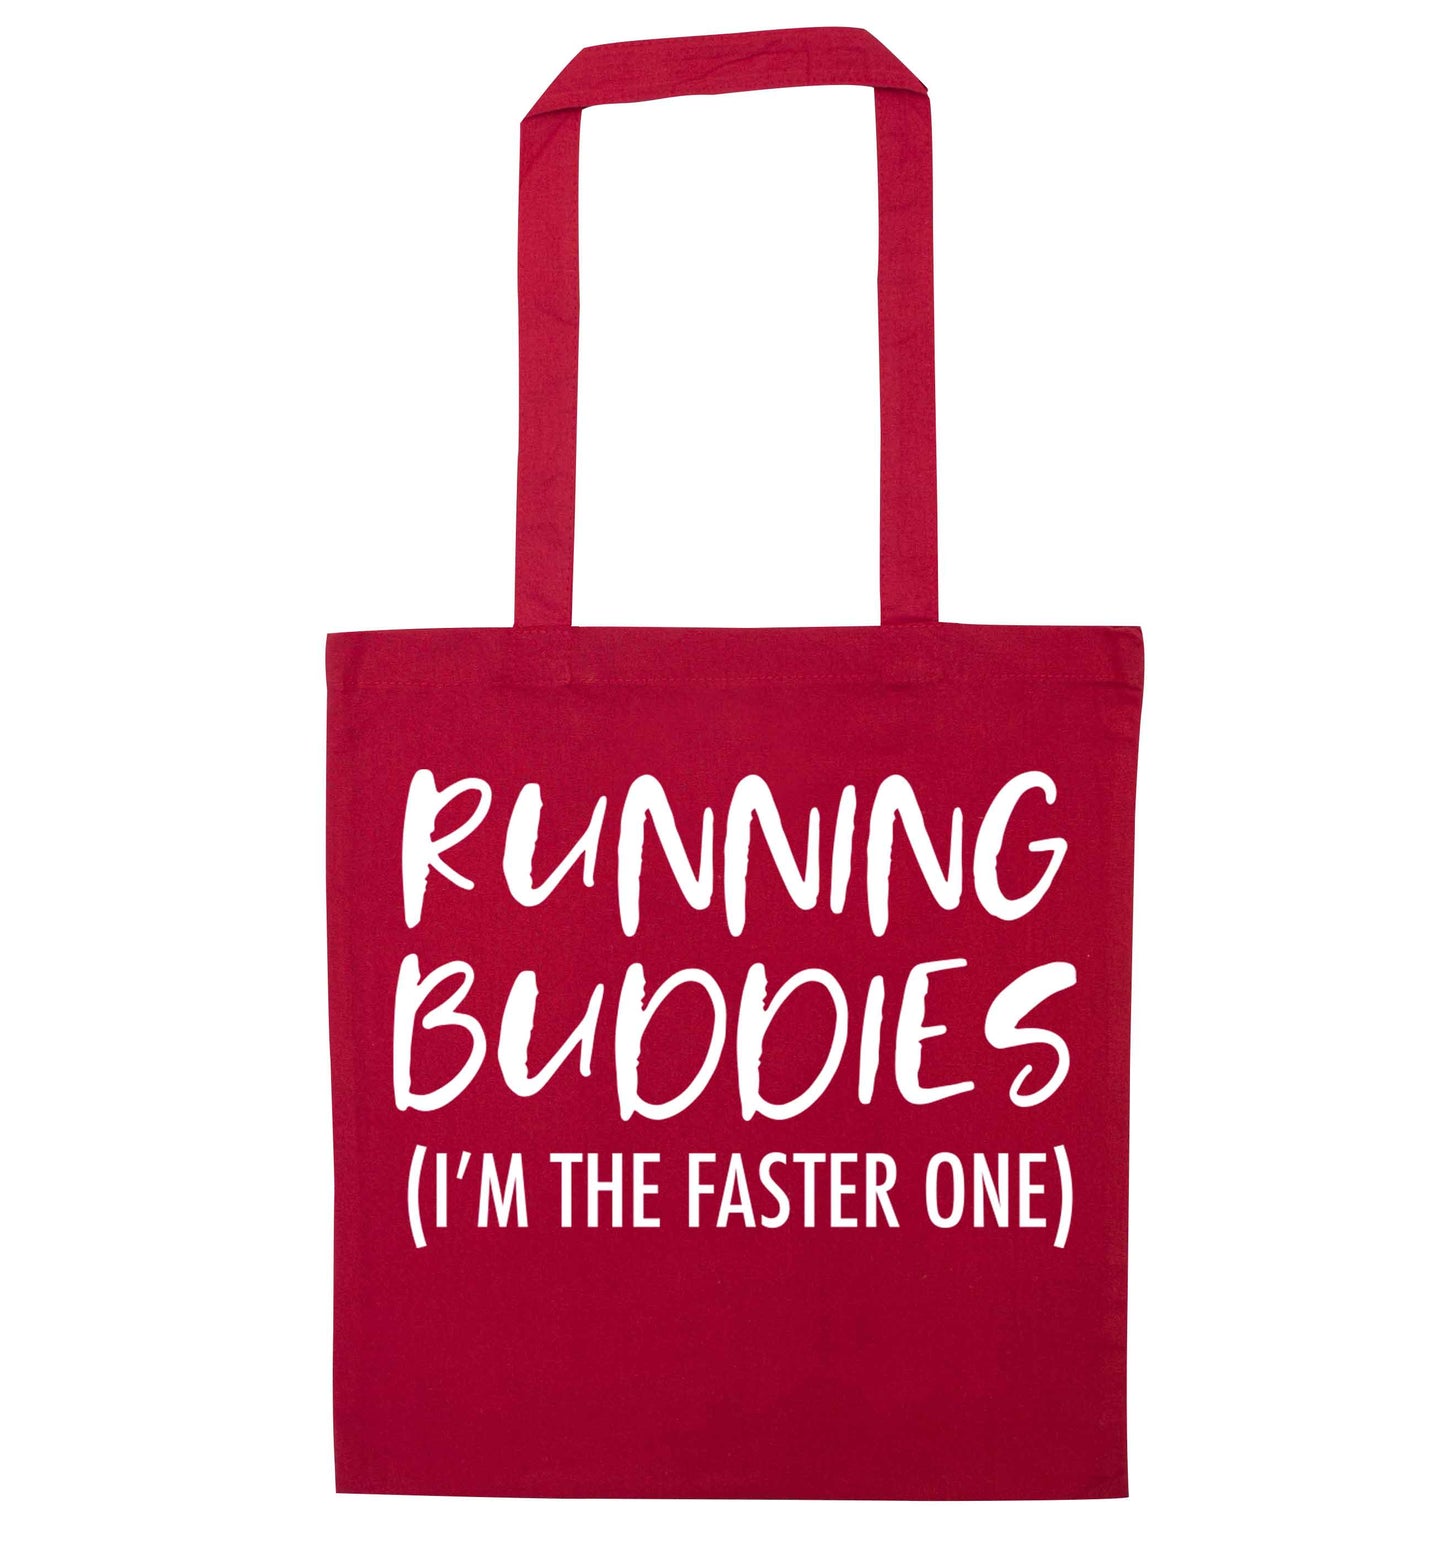 Running buddies (I'm the faster one) red tote bag